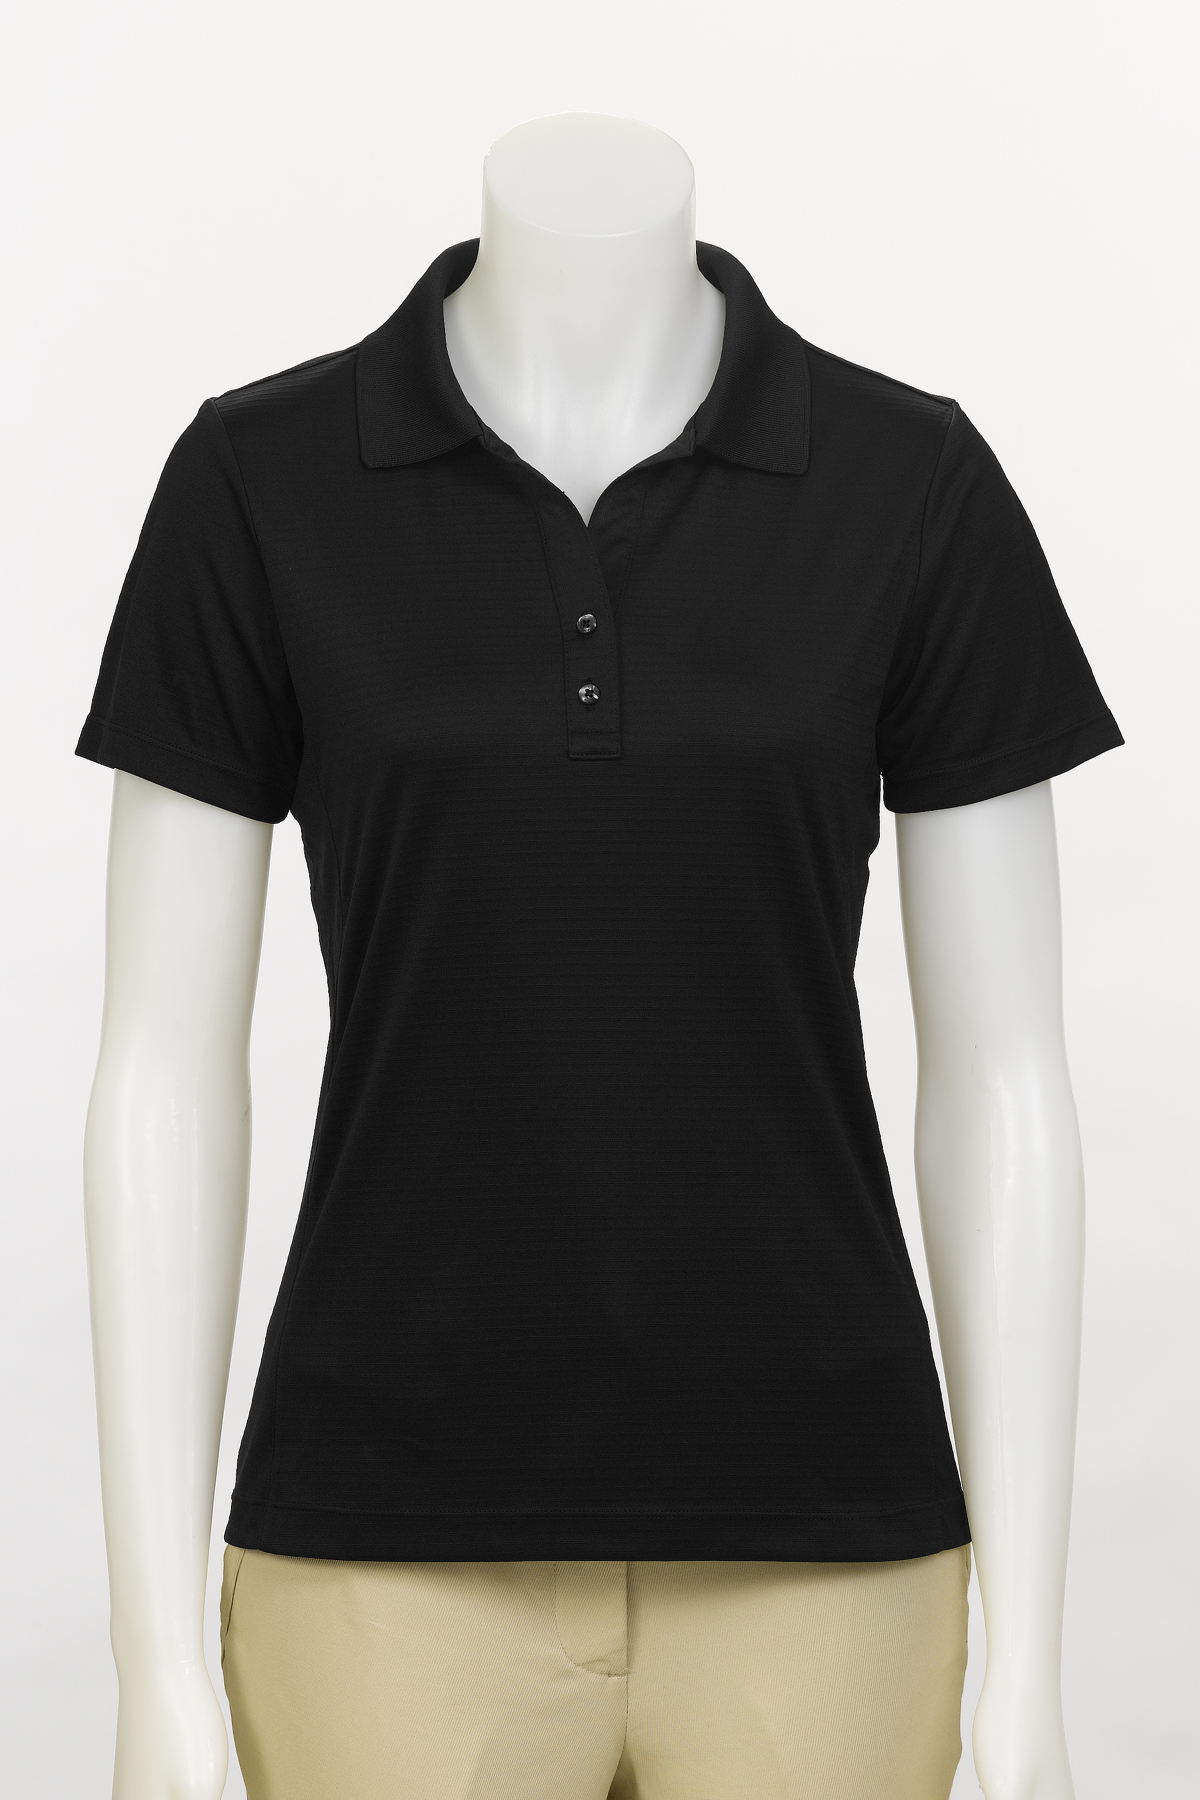 Greg Norman WNS3K447 - Women's Play Dry® ML75 Textured Solid Polo